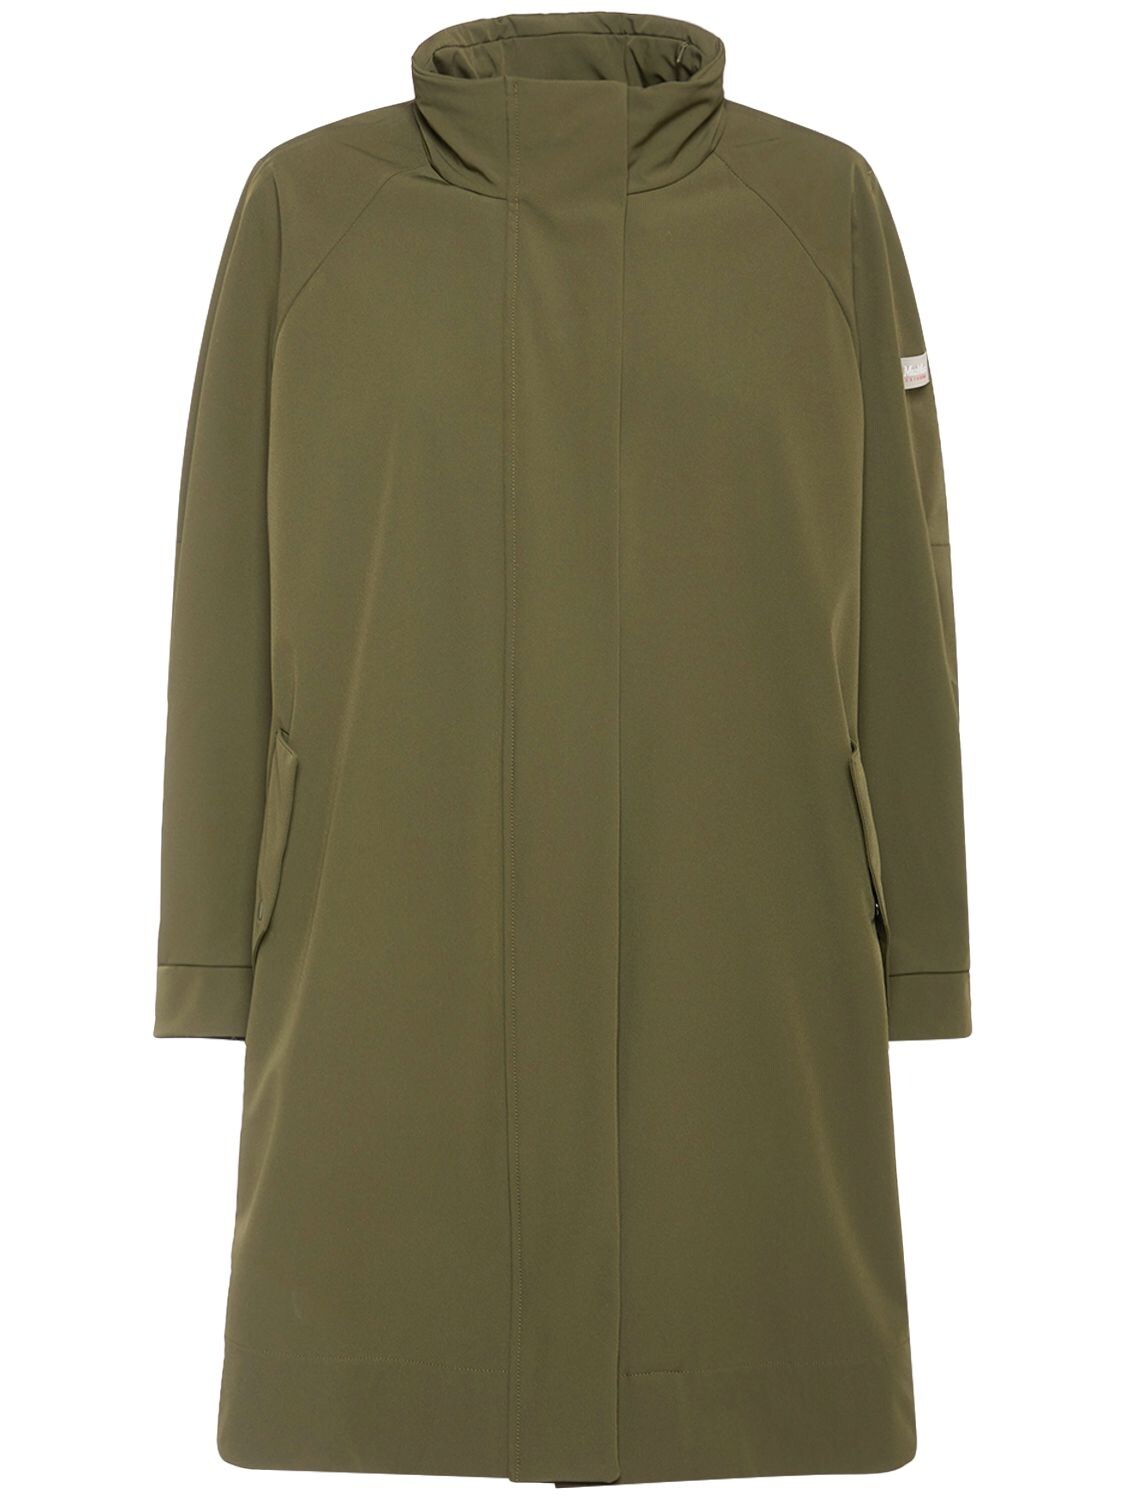 Max Mara Beirut Tech Raincoat W/ Quilted Vest In Olive Green